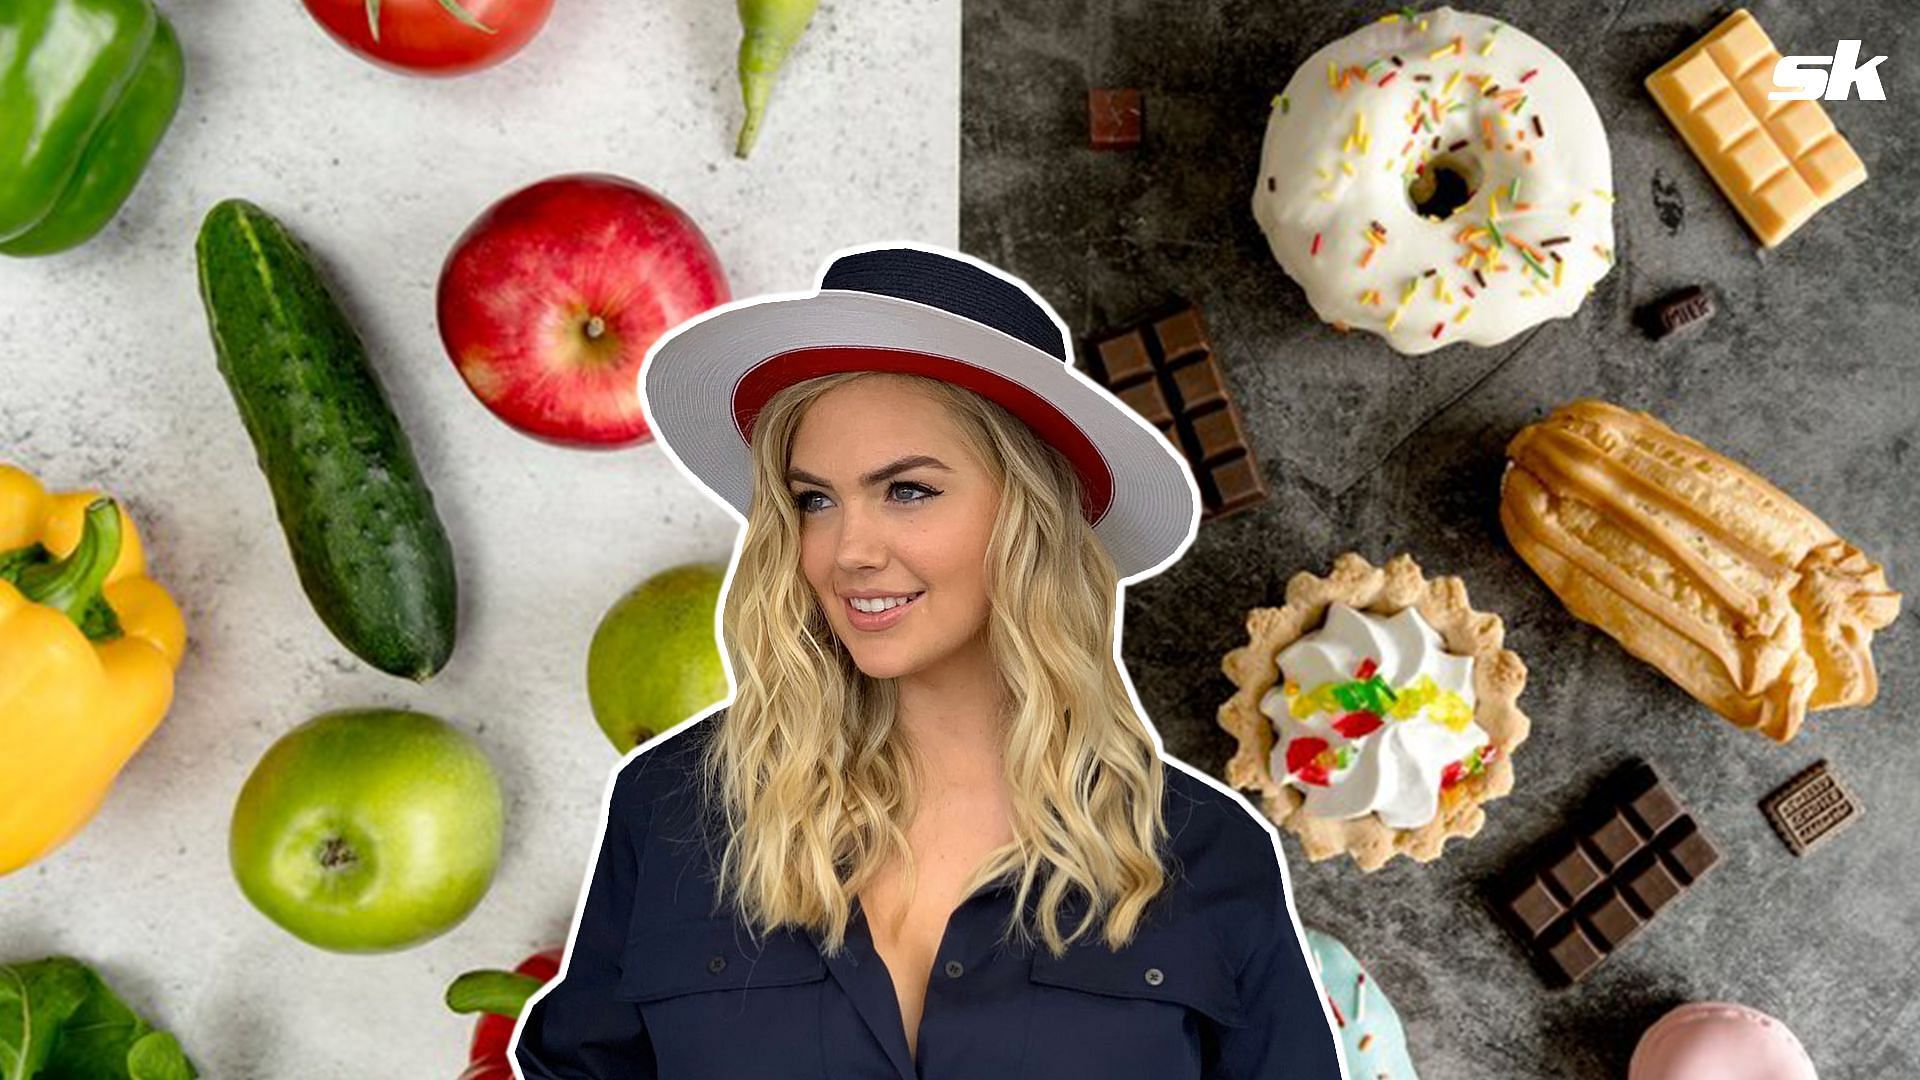 Diet is everything for actress and model Kate Upton